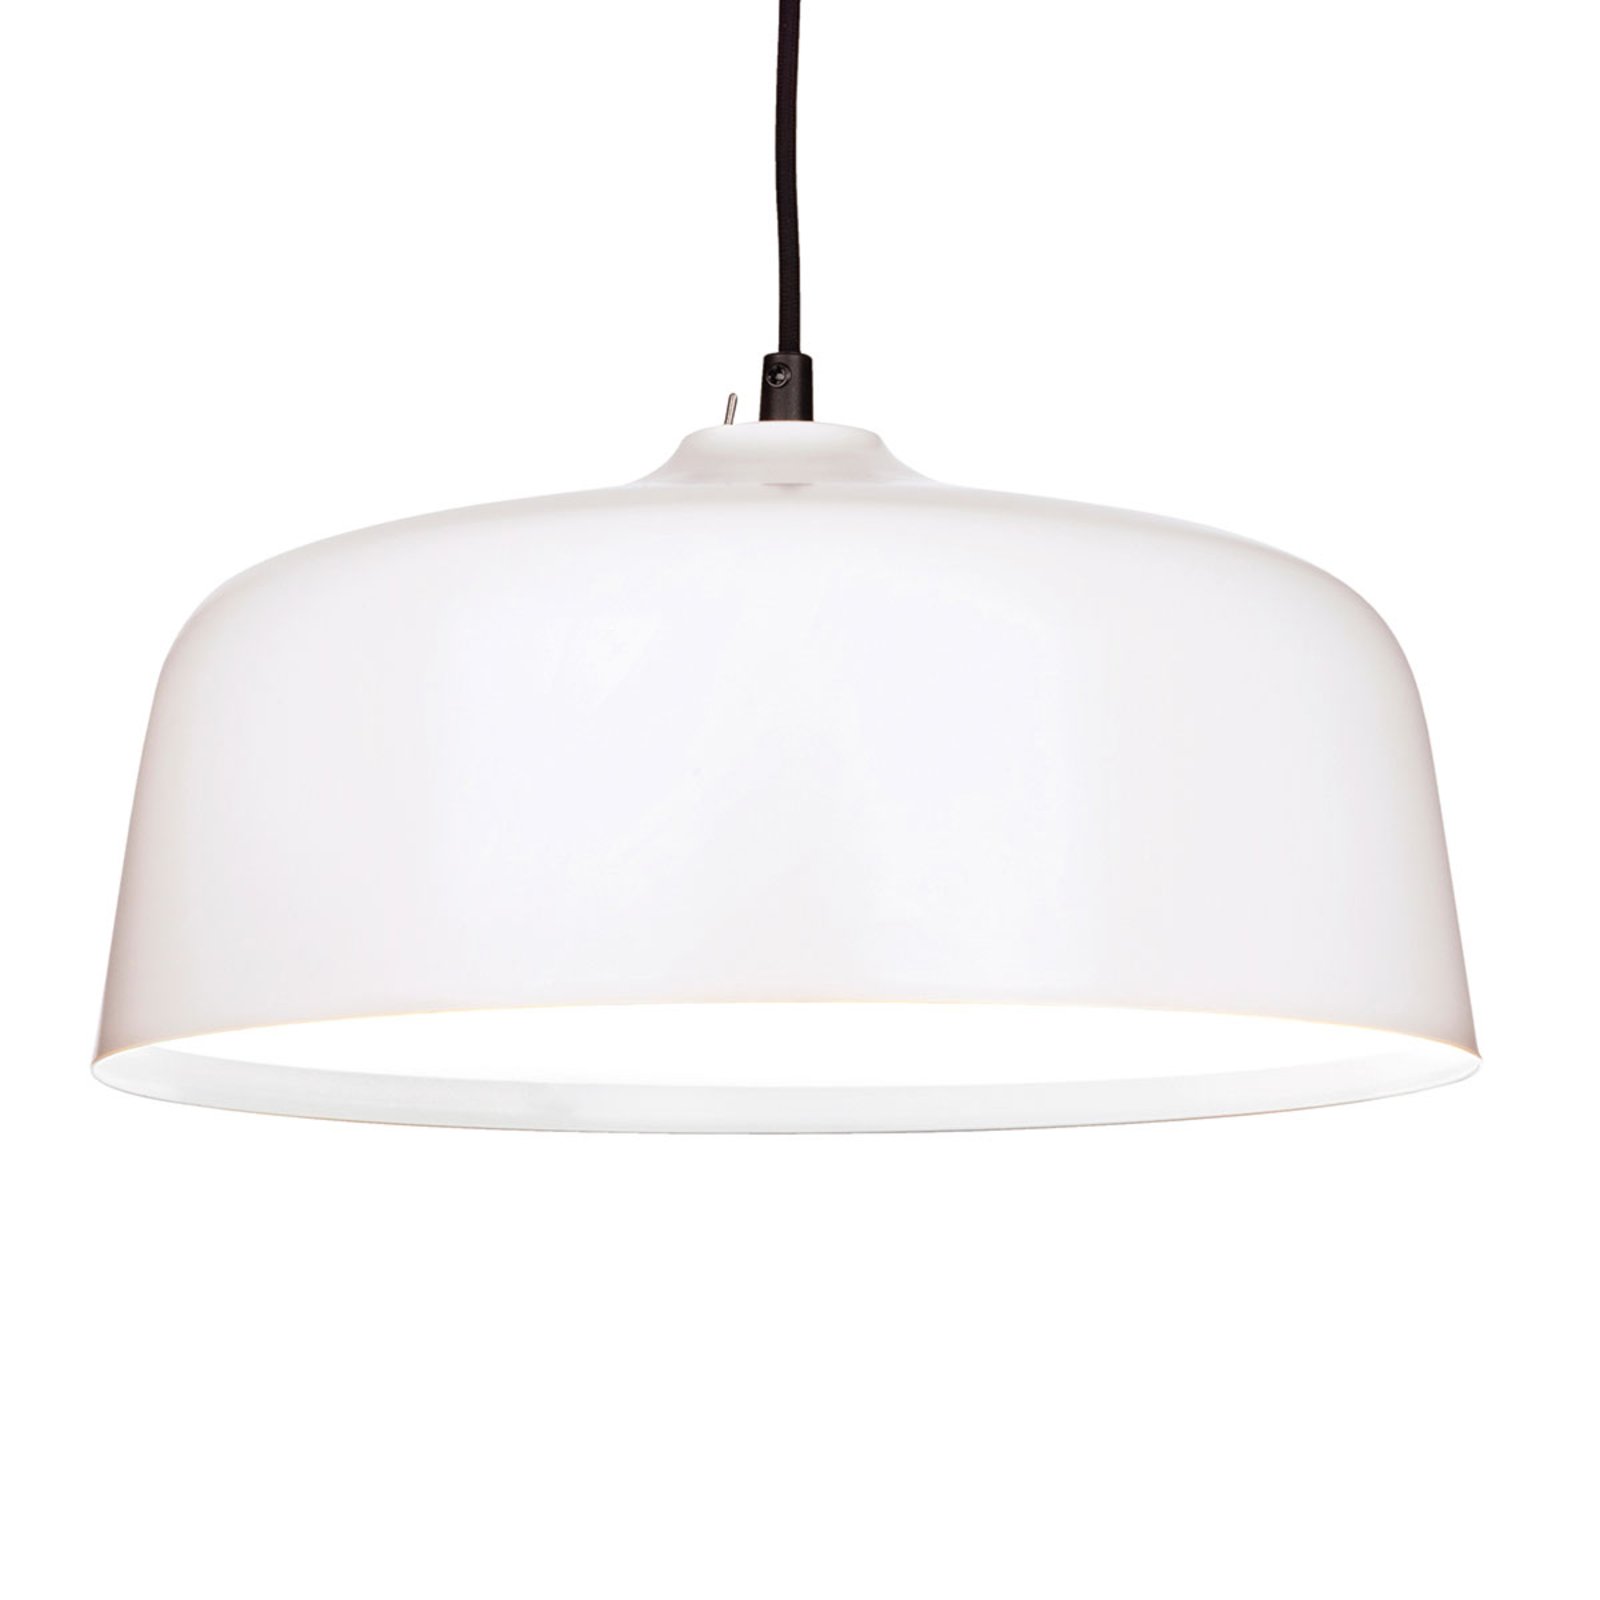 Innolux Candeo therapy light hanging light white